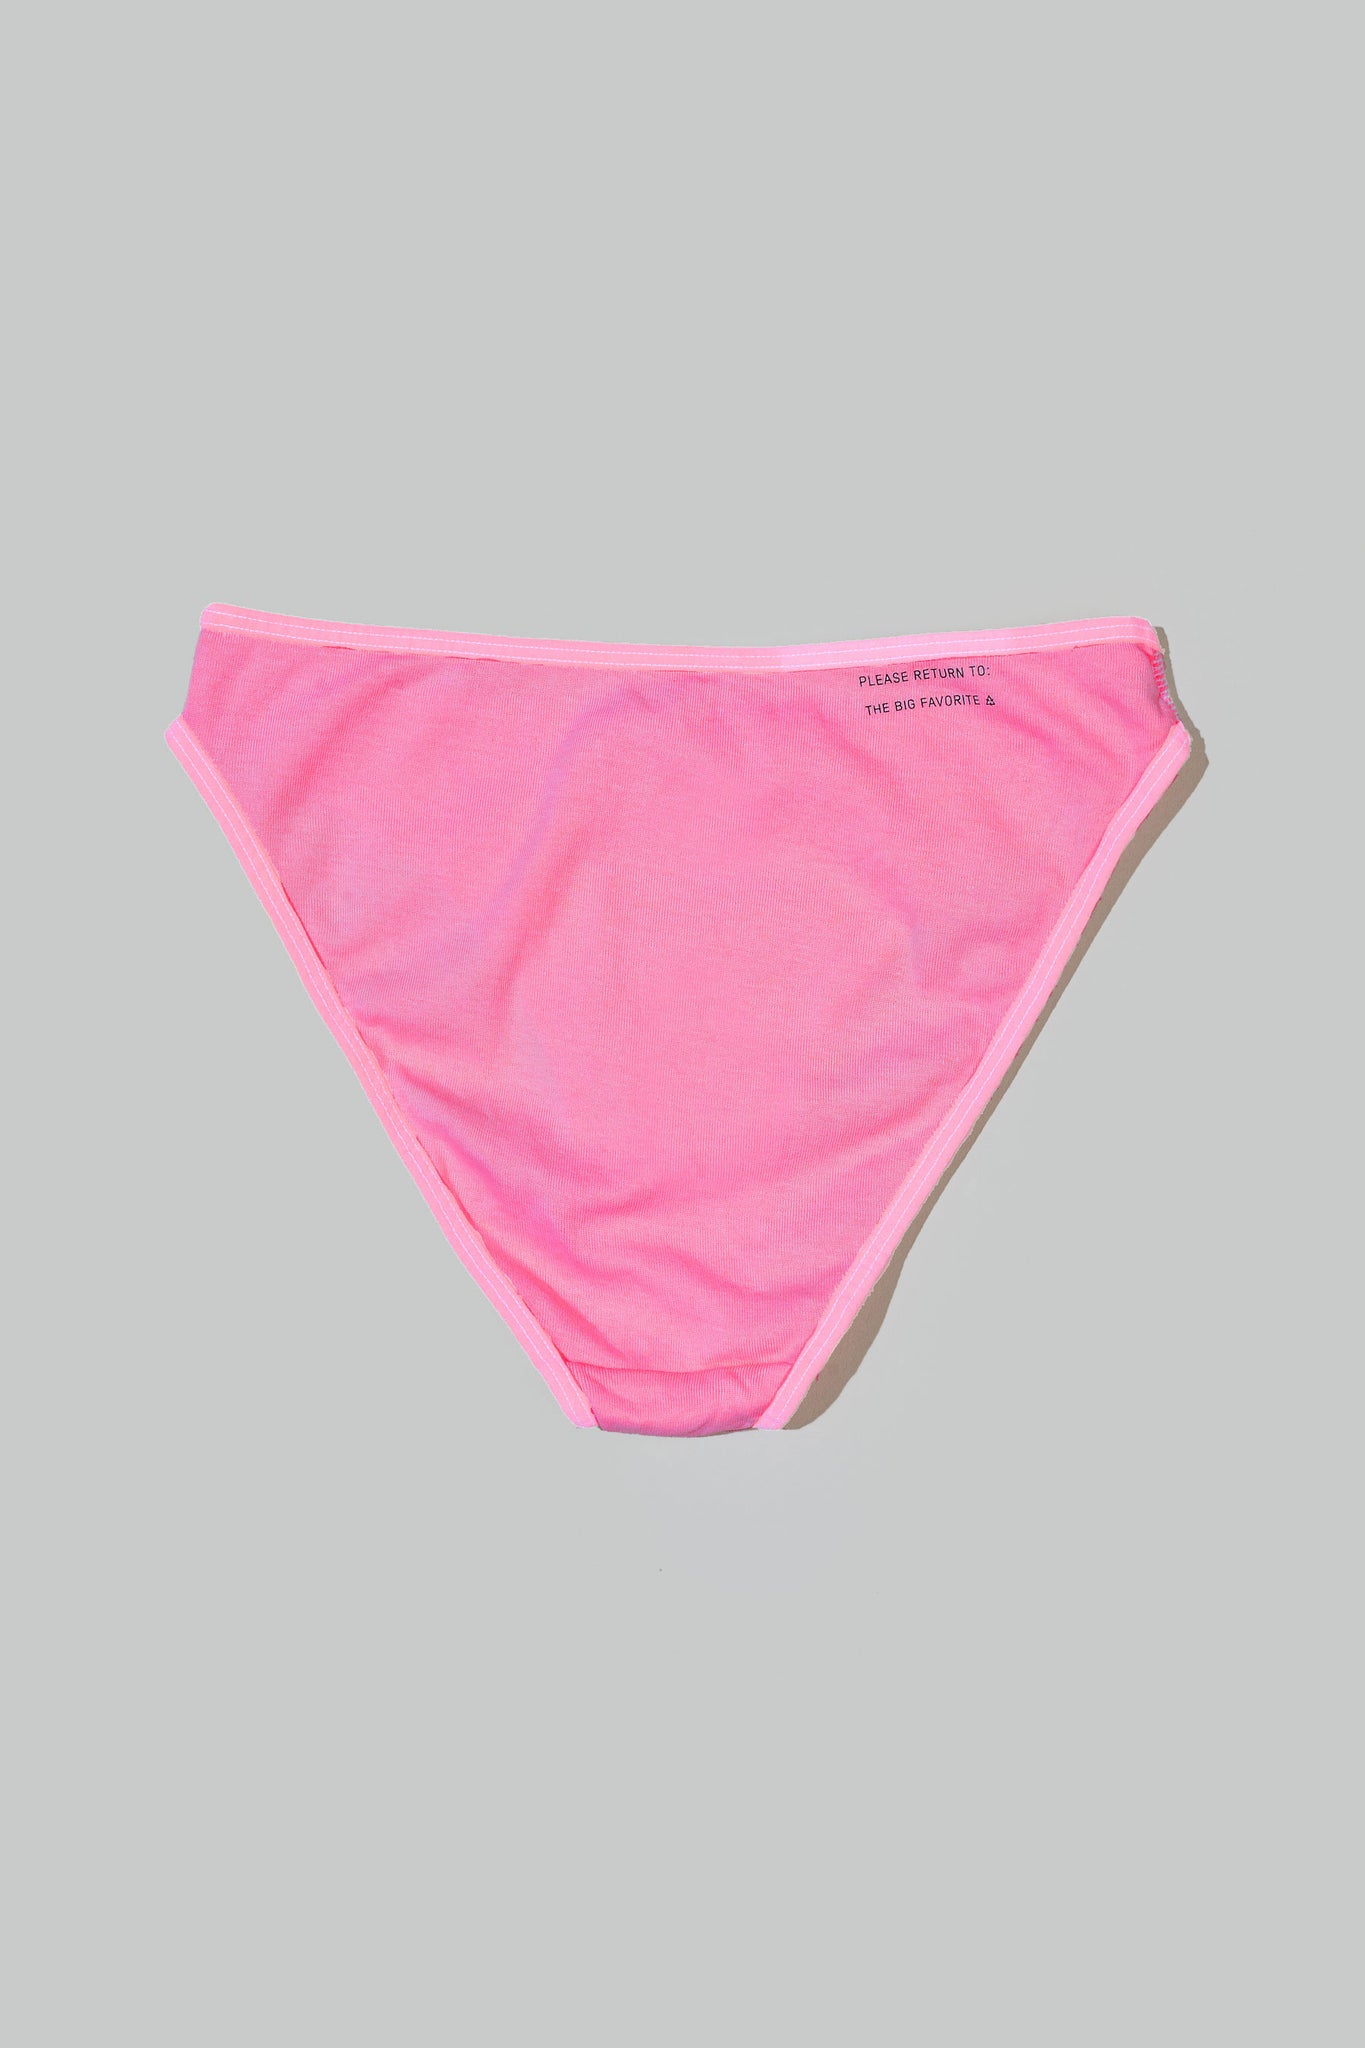 a bikini brief in hot pink laid on the floor